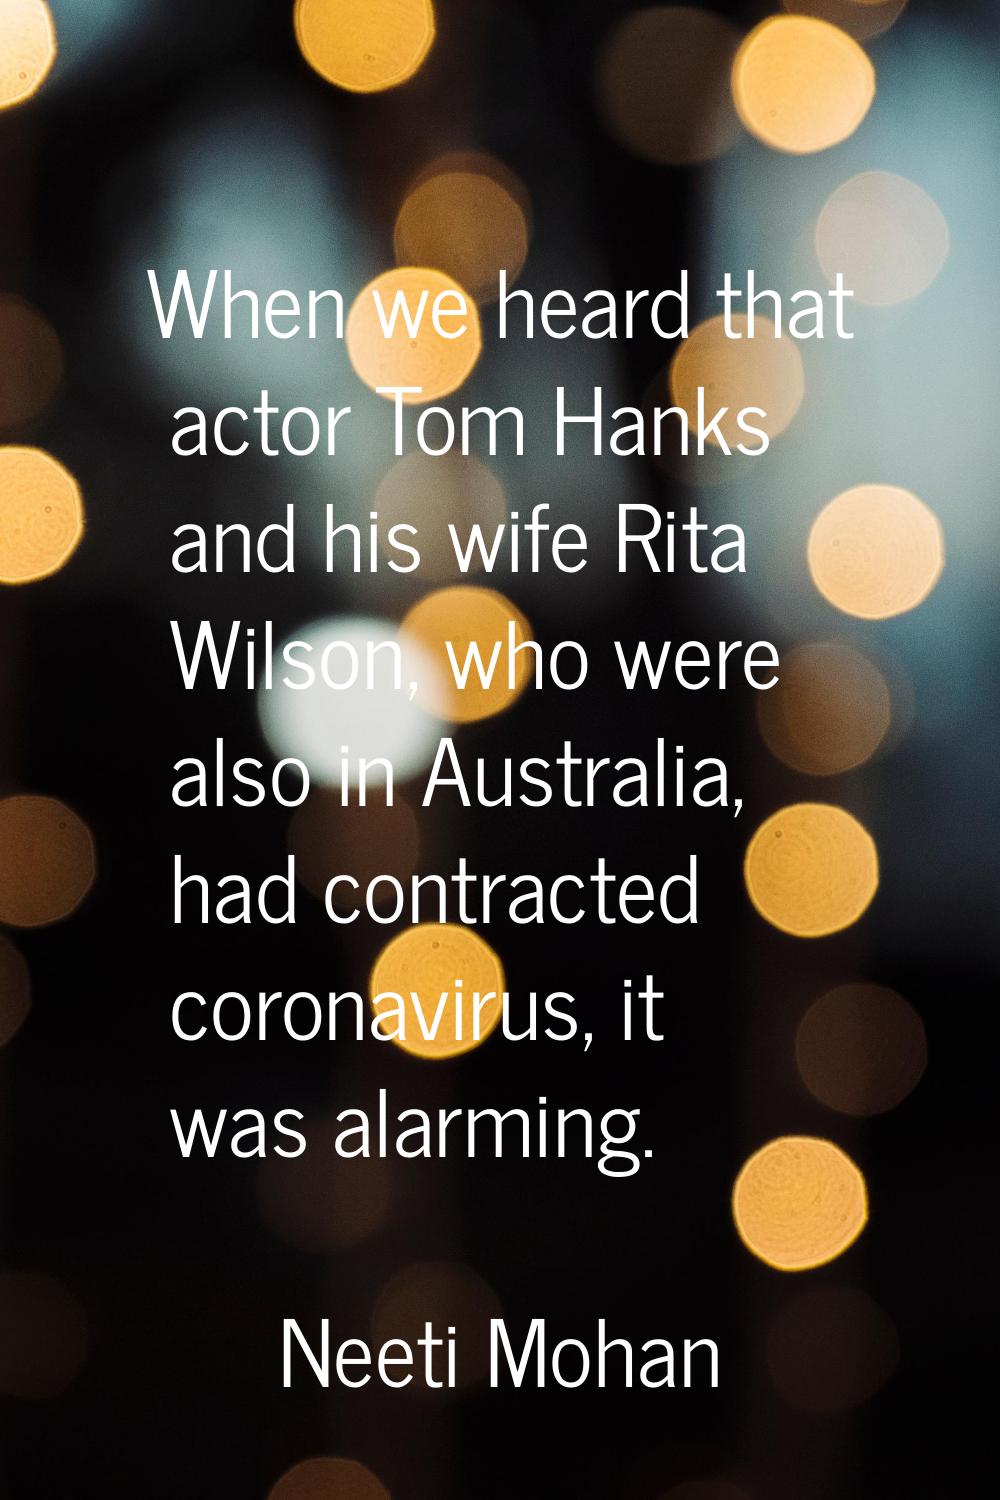 When we heard that actor Tom Hanks and his wife Rita Wilson, who were also in Australia, had contra